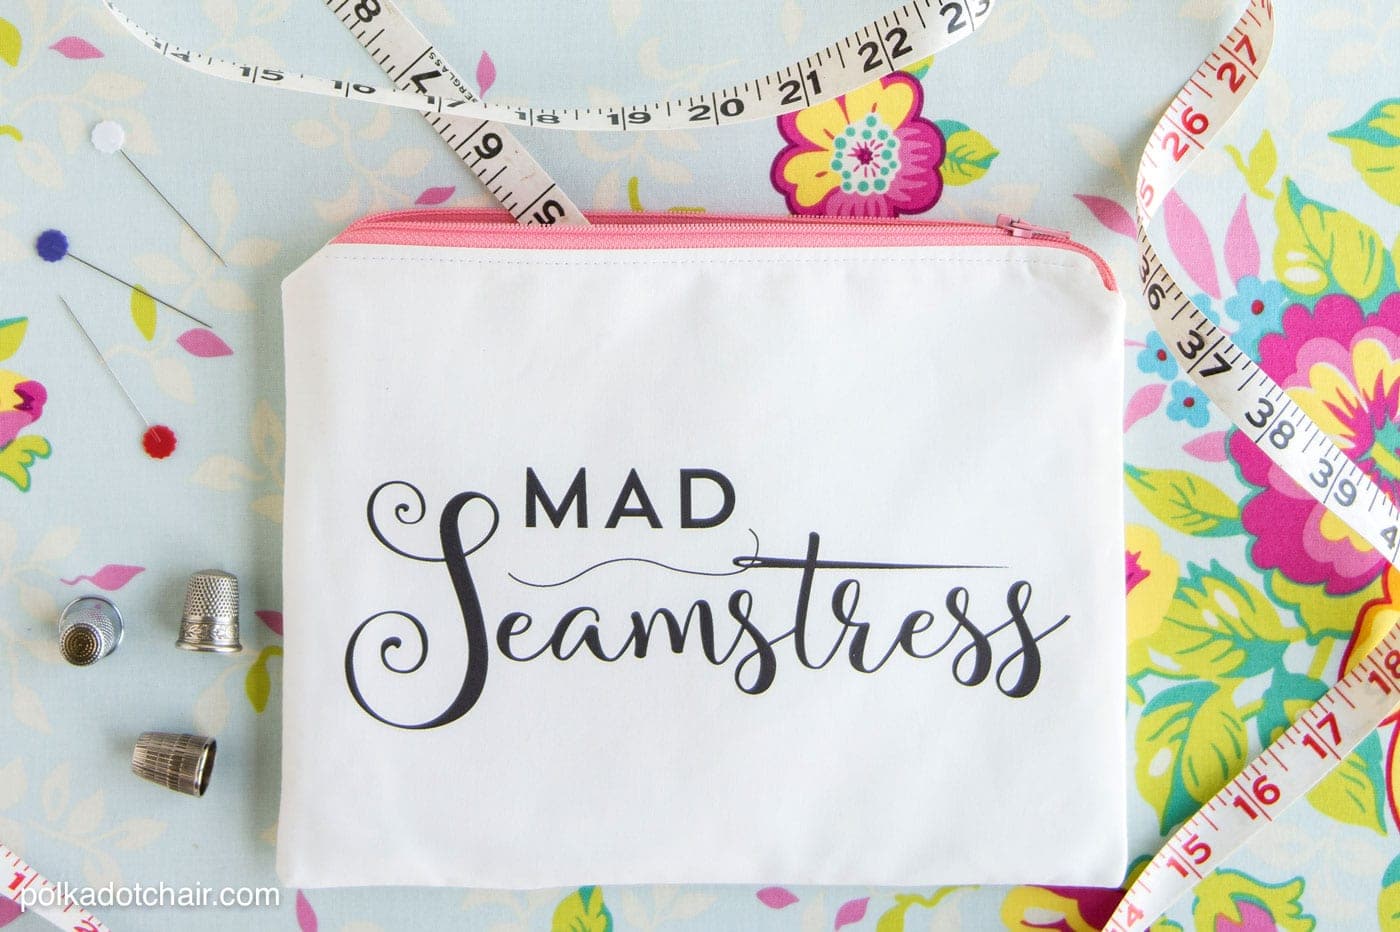 Sewing tutorial to make this "Mad Seamstress" zip pouch. You can download the image and print it at home on fabric yourself!